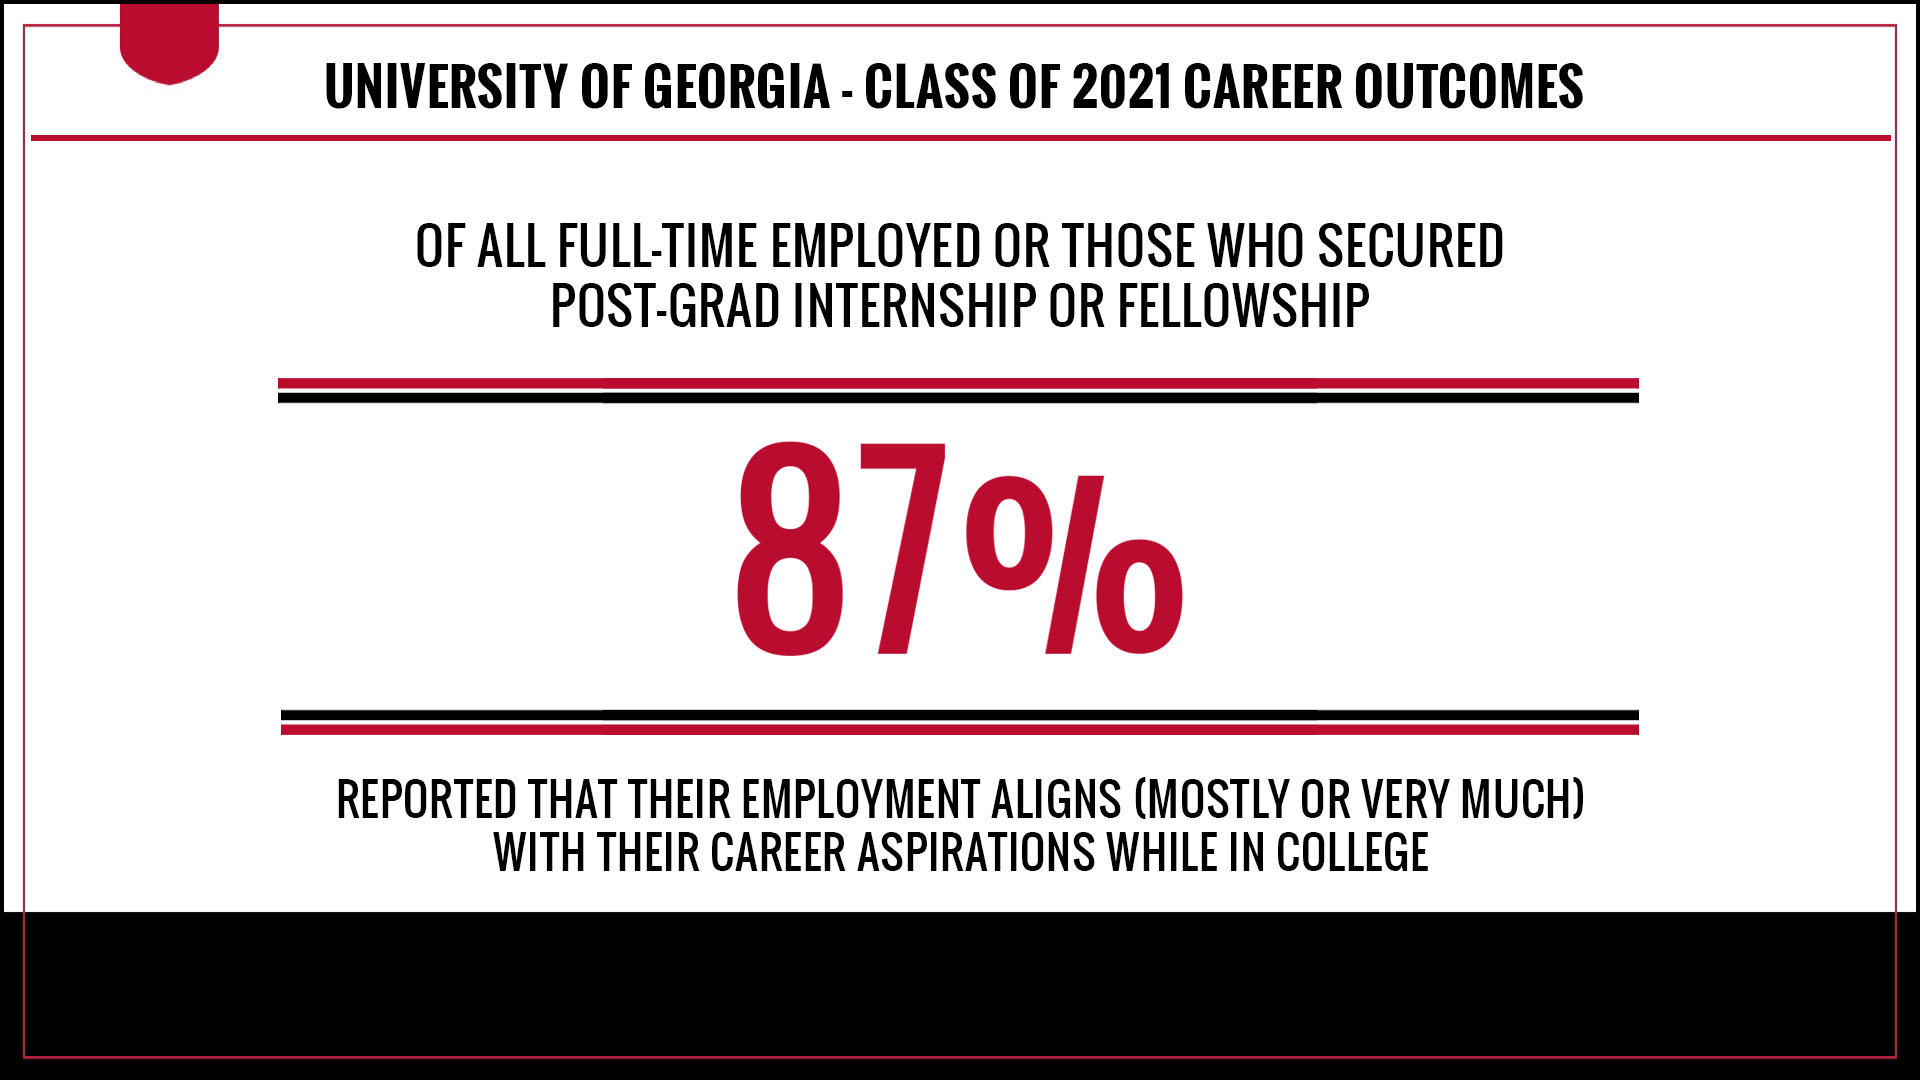 OF ALL FULL-TIME EMPLOYED UGA CLASS OF 2021 GRADUATES, OR THOSE WHO SECURED A POST-GRAD INTERNSHIP OR FELLOWSHIP, 87 PERCENT REPORTED THAT THEIR EMPLOYMENT ALIGNS (MOSTLY OR VERY MUCH) WITH THEIR CAREER ASPIRATIONS WHILE IN COLLEGE